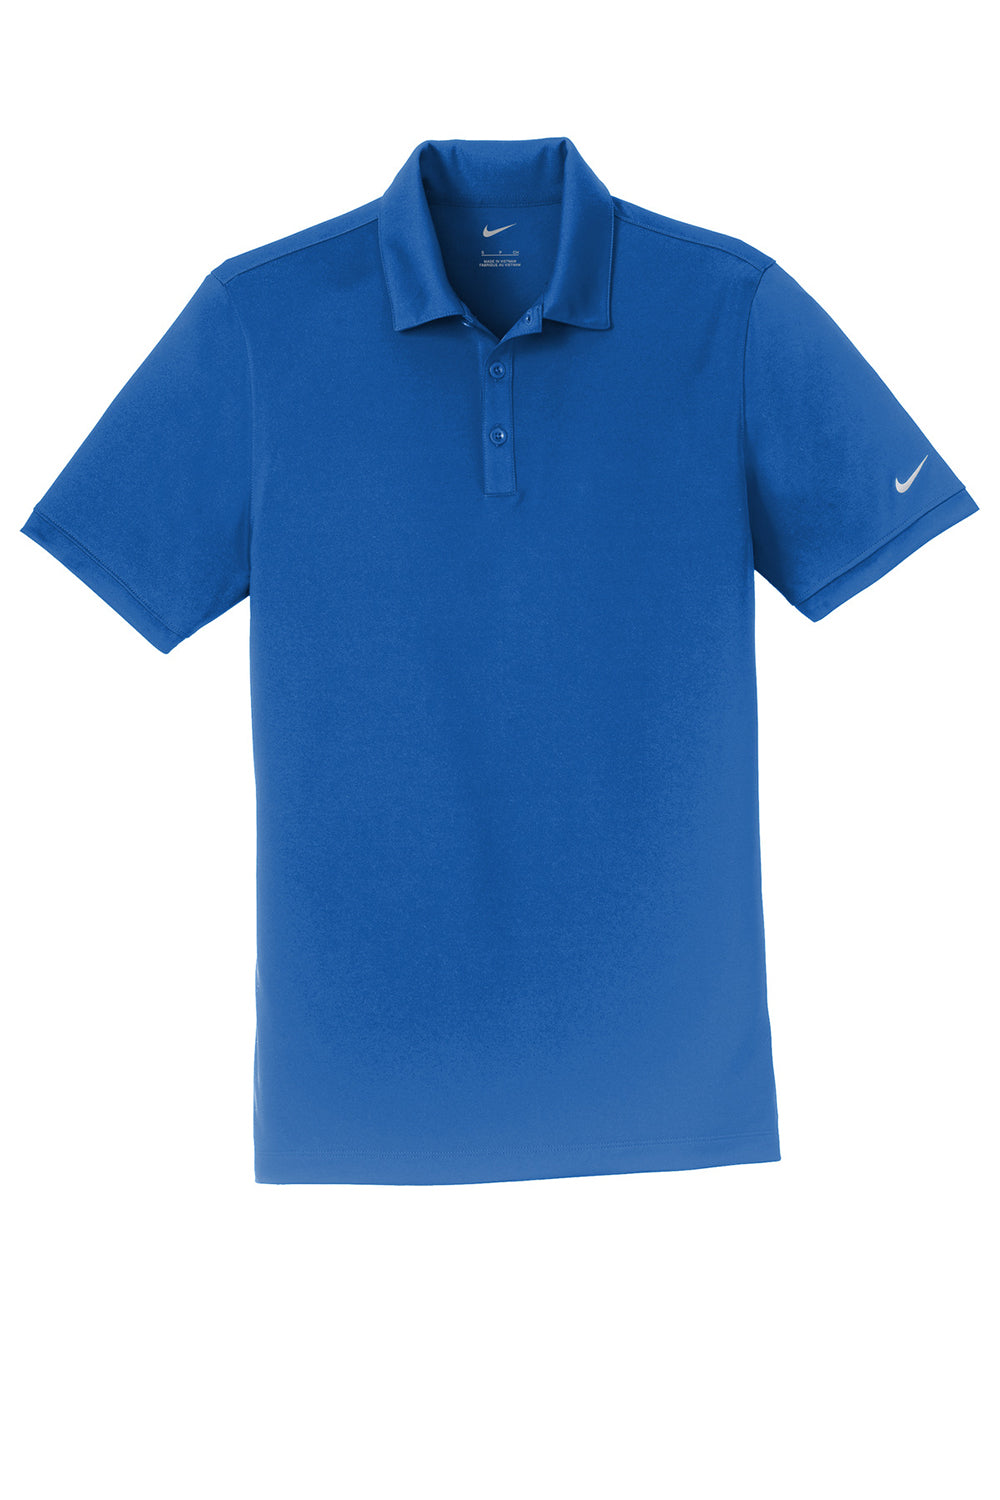 Nike 799802 Mens Players Dri-Fit Moisture Wicking Short Sleeve Polo Shirt Gym Blue Flat Front